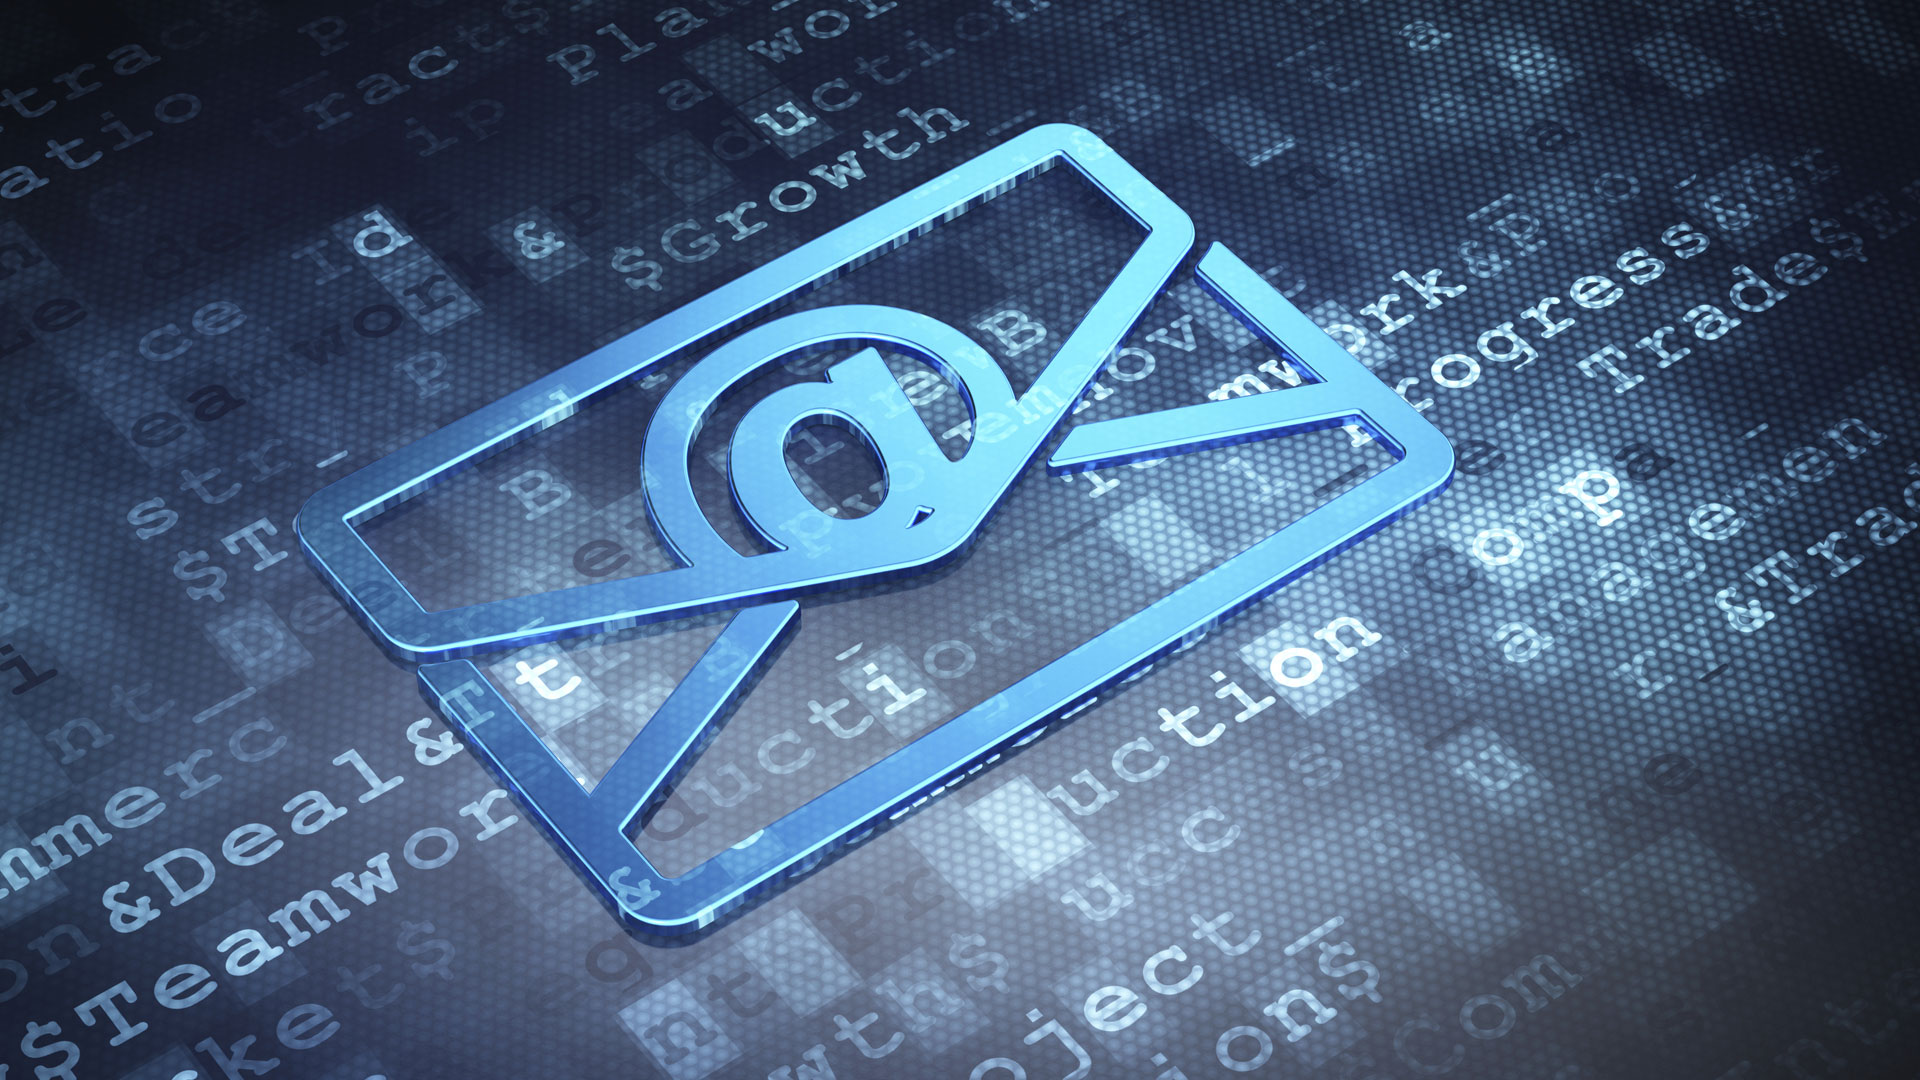 smtp hosting providers with high email deliverability - atulhost